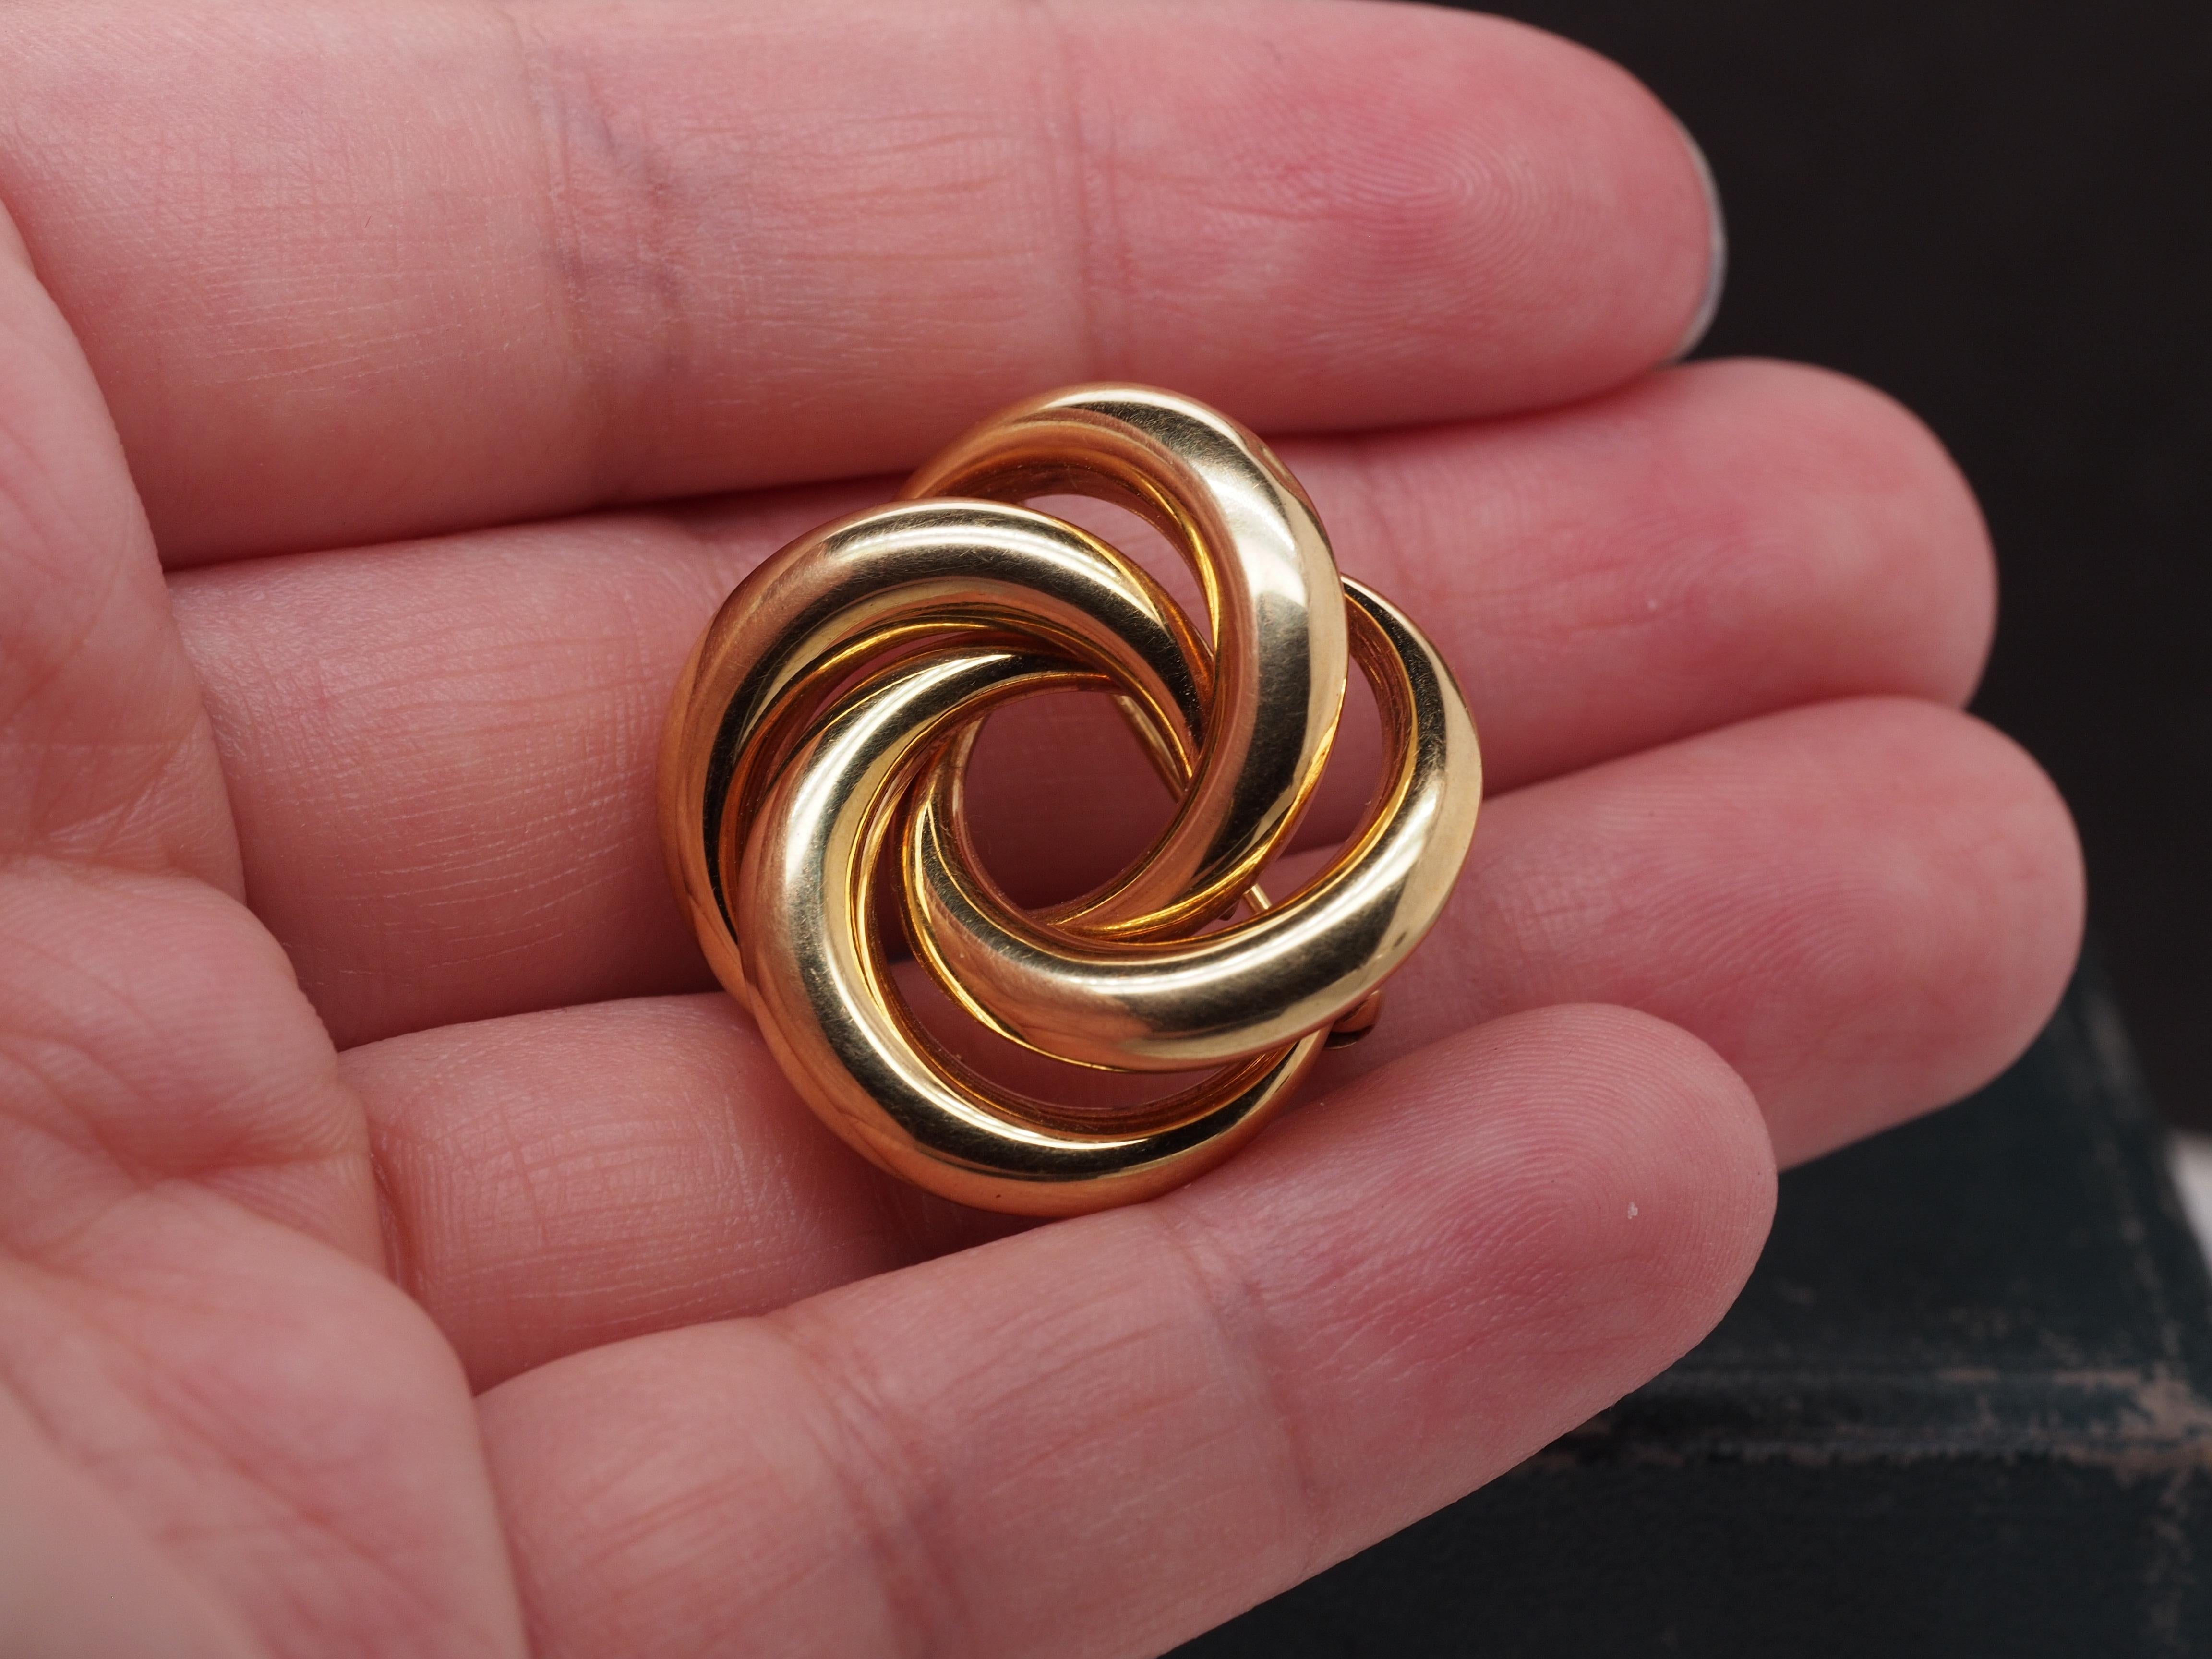 Vintage 14K Yellow Gold 1930s Swirl Brooch with German Hallmarks In Good Condition For Sale In Atlanta, GA